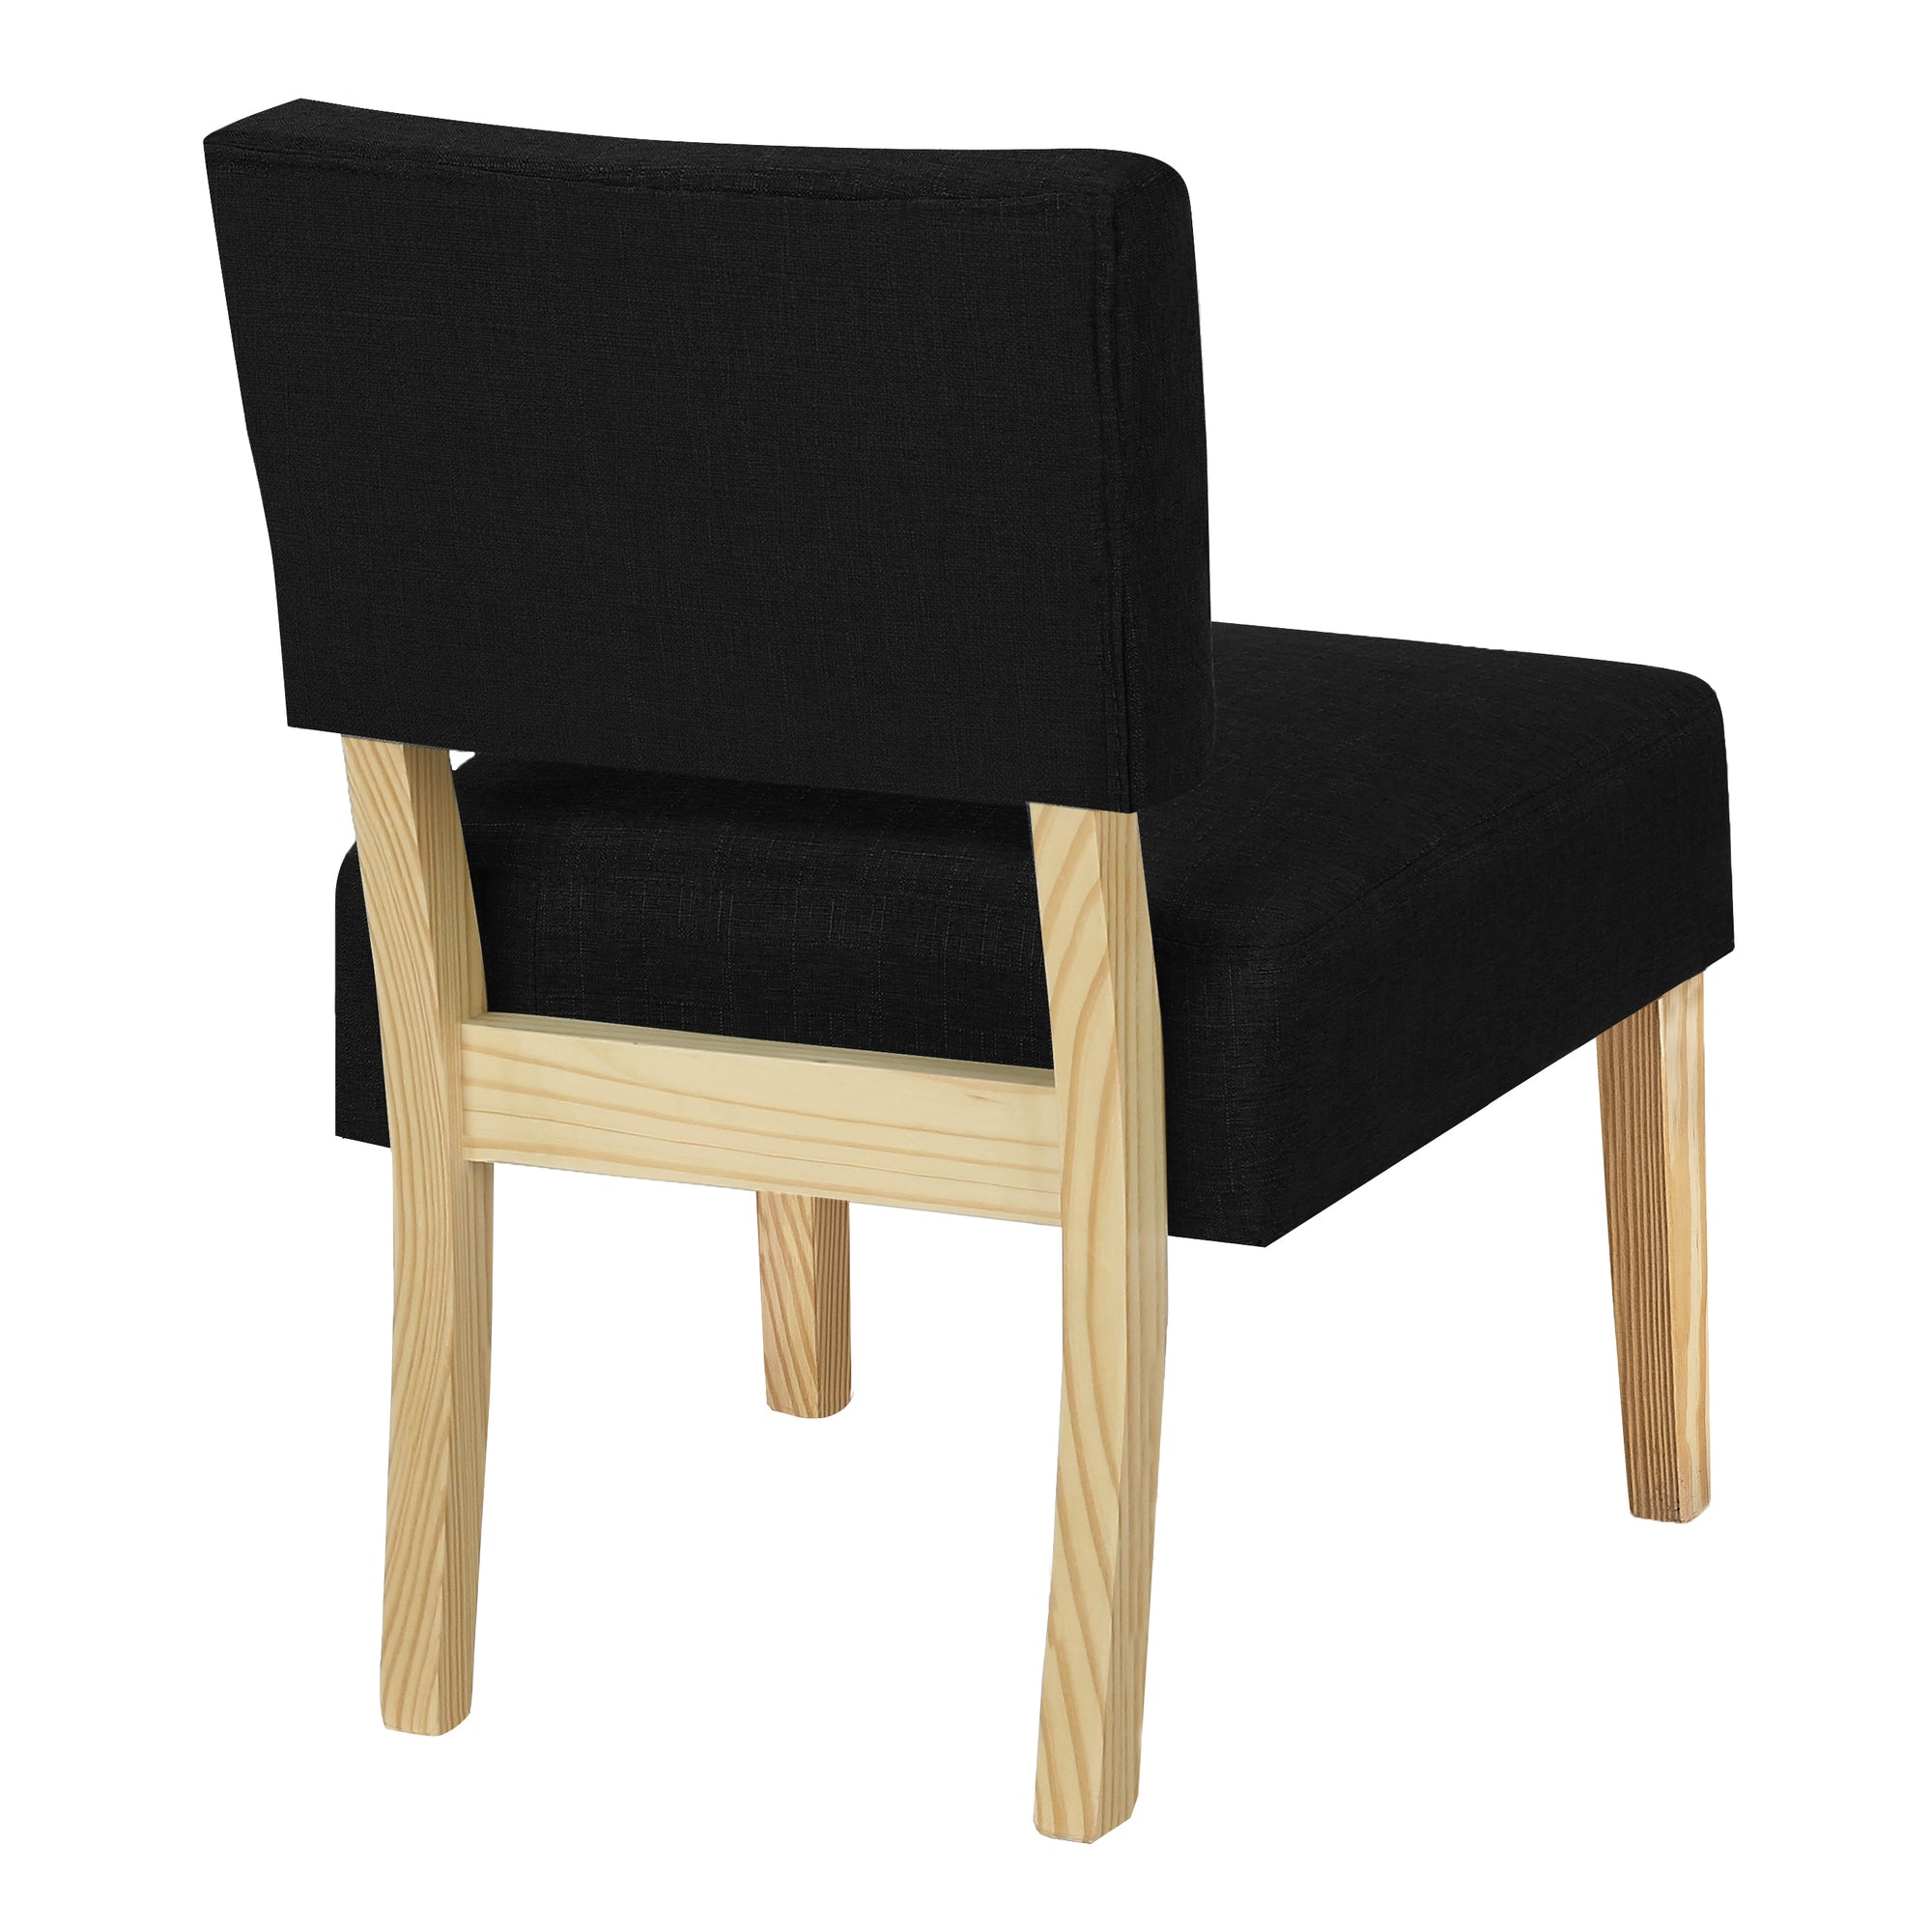 Accent Chair - Black Fabric / Natural Wood Legs